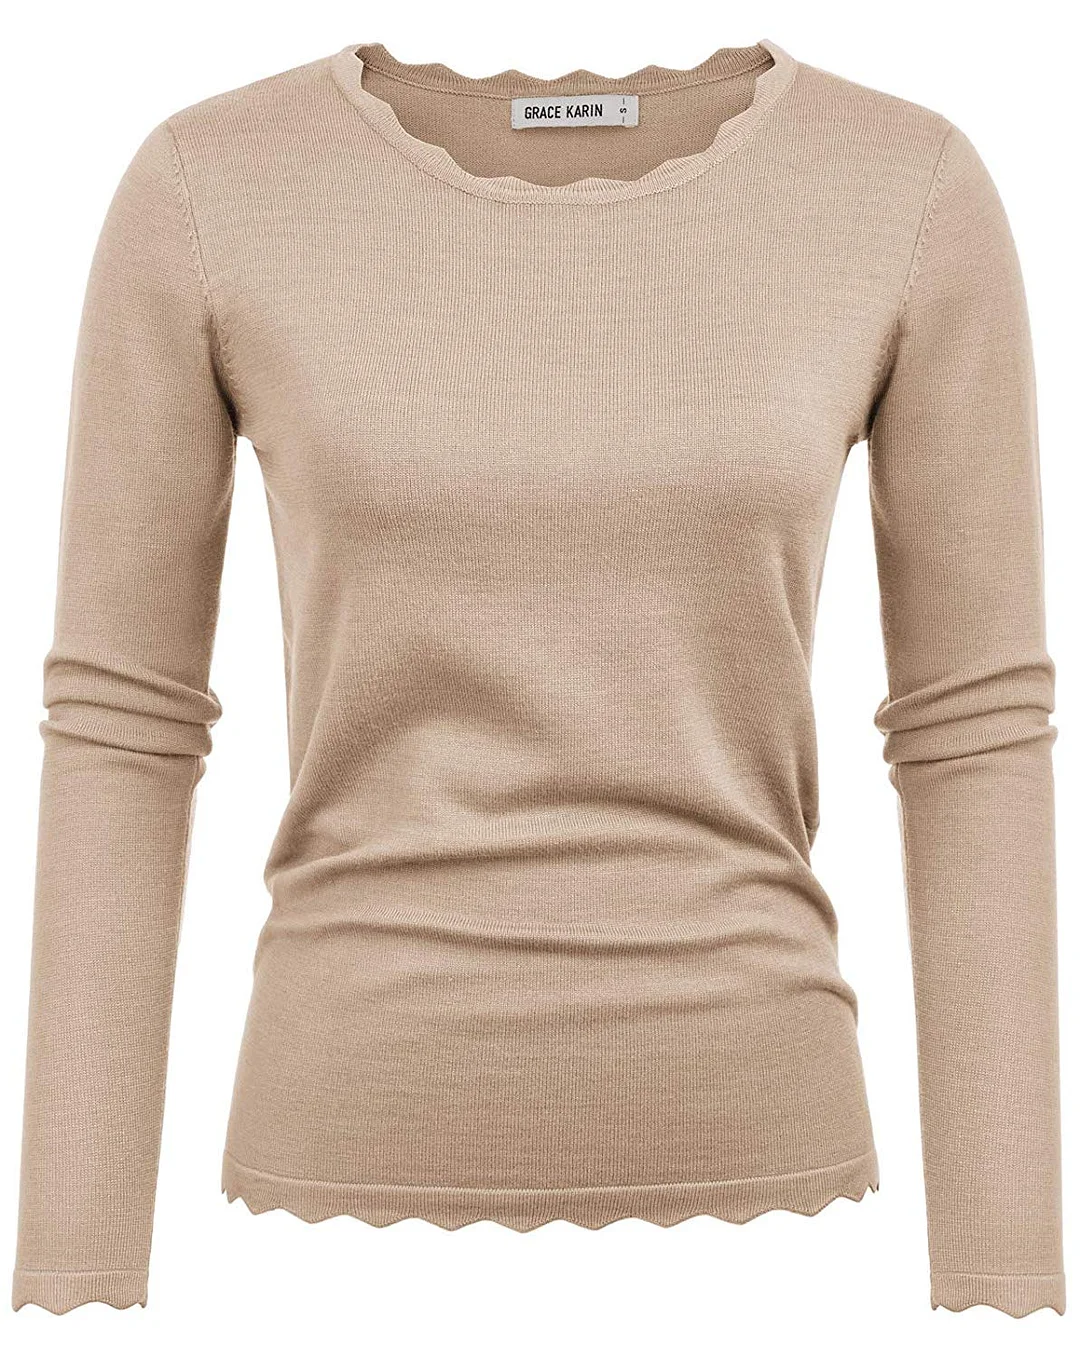 Women's High Stretchy Long Sleeve Pullover Sweater Blouse Top